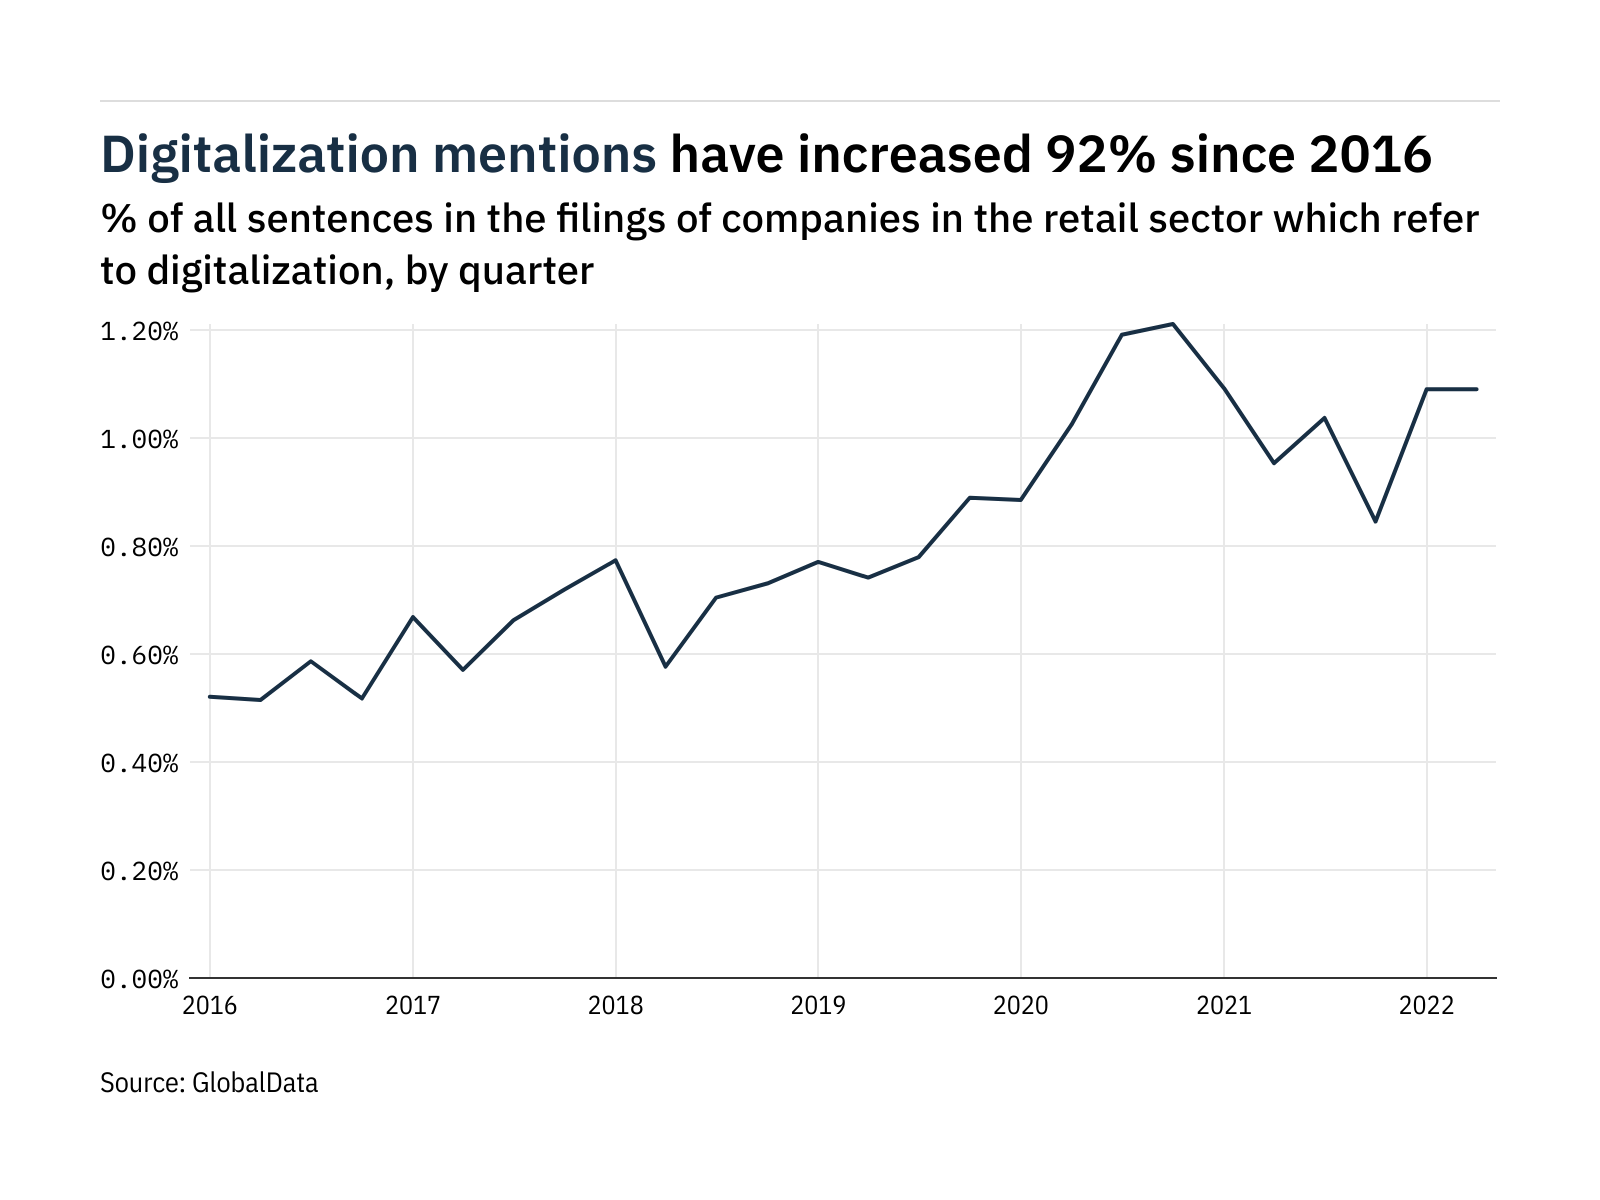 Filings buzz: tracking digitalization mentions in retail